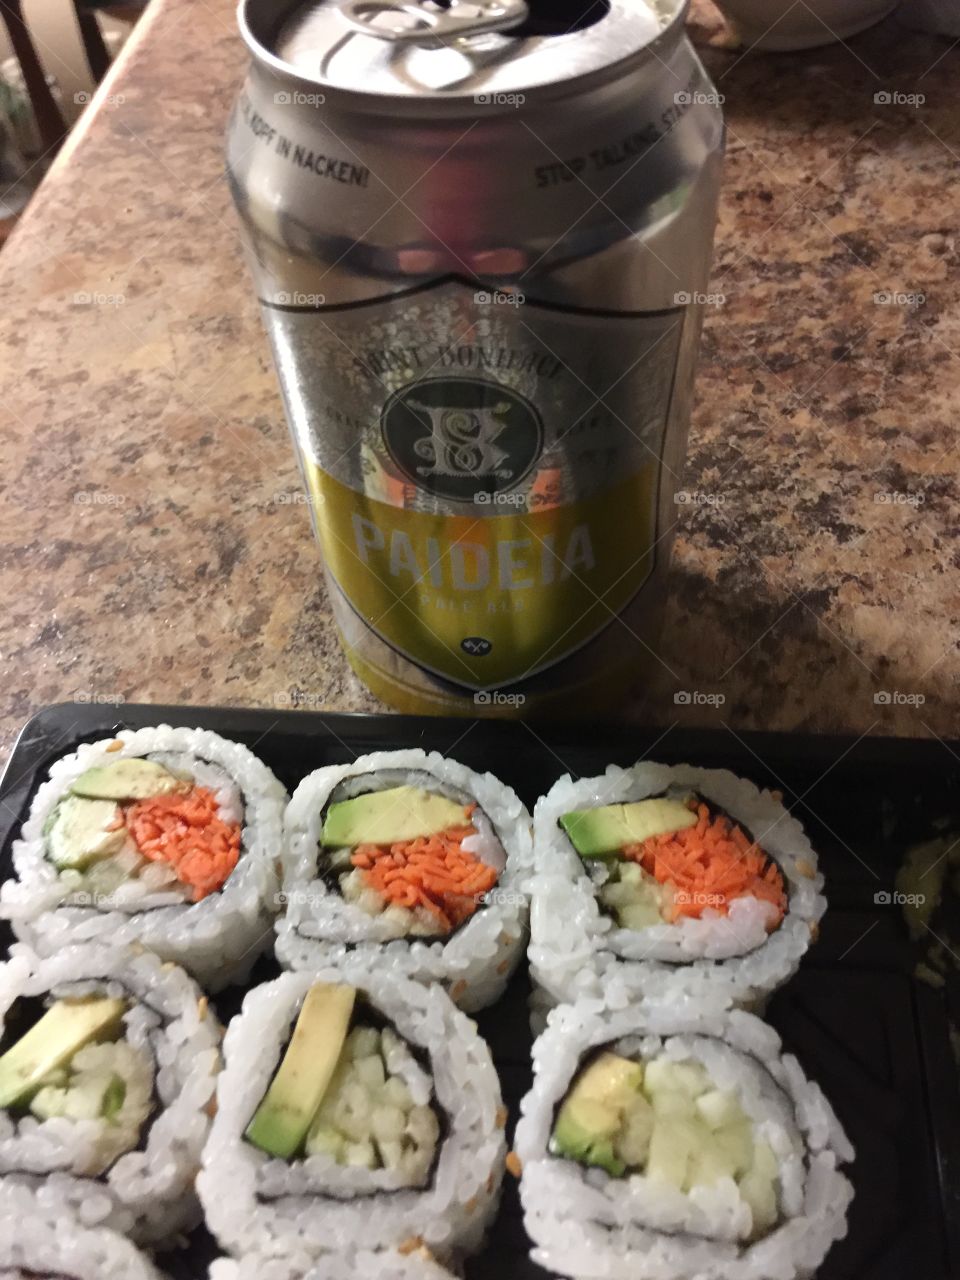 What goes with sushi? Craft beer of course!